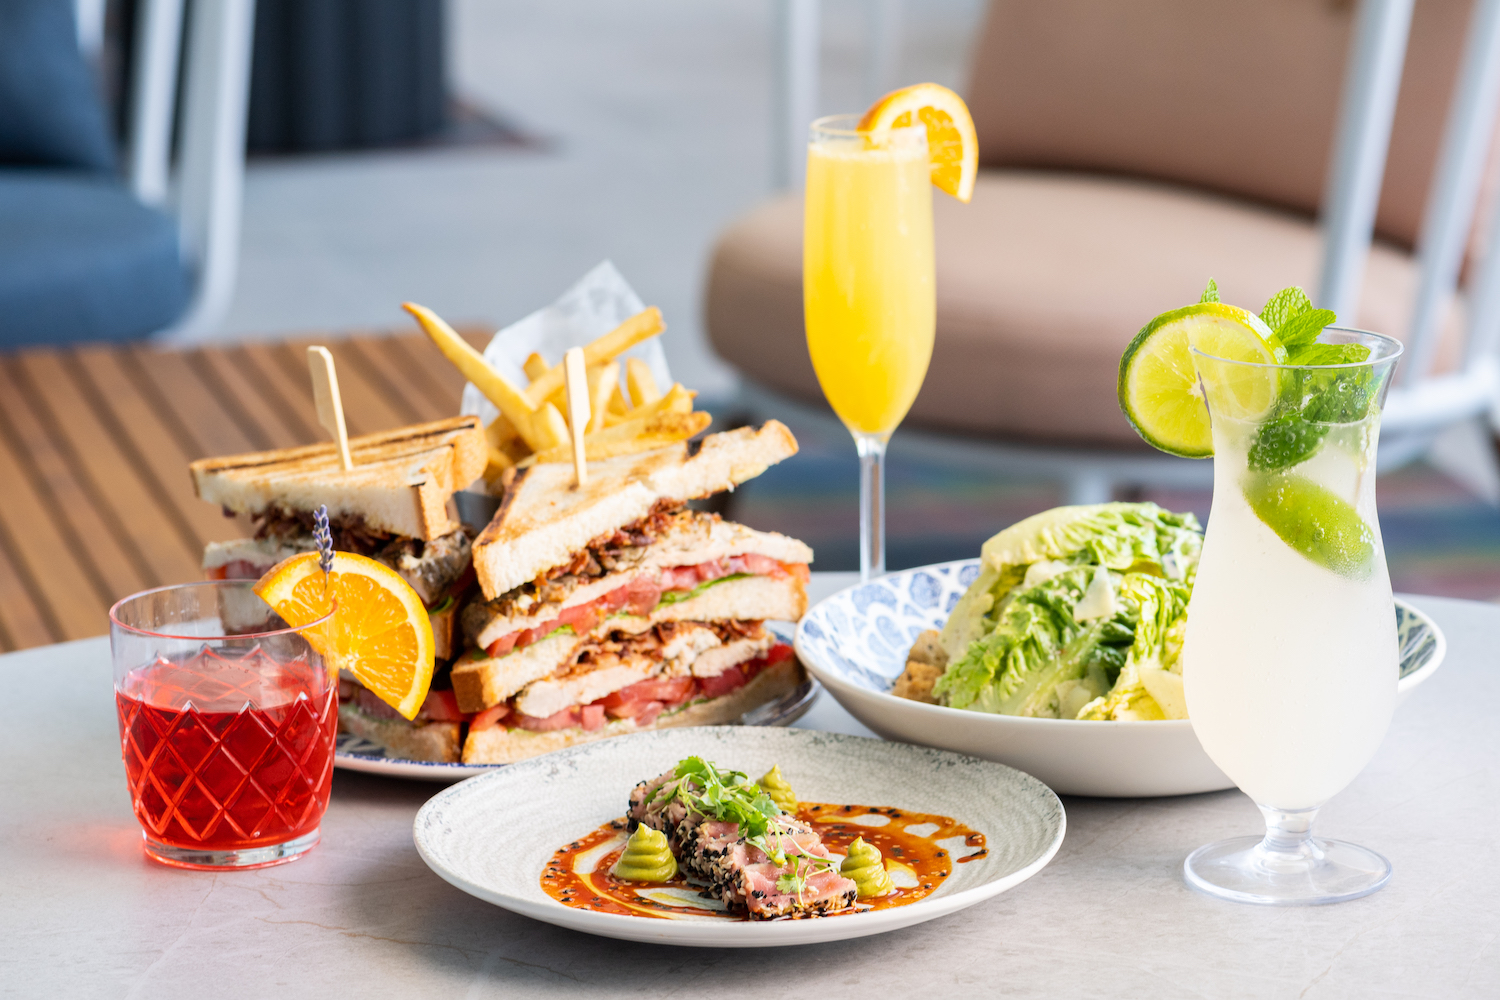 Sandwich and sides with mimosas and cocktails